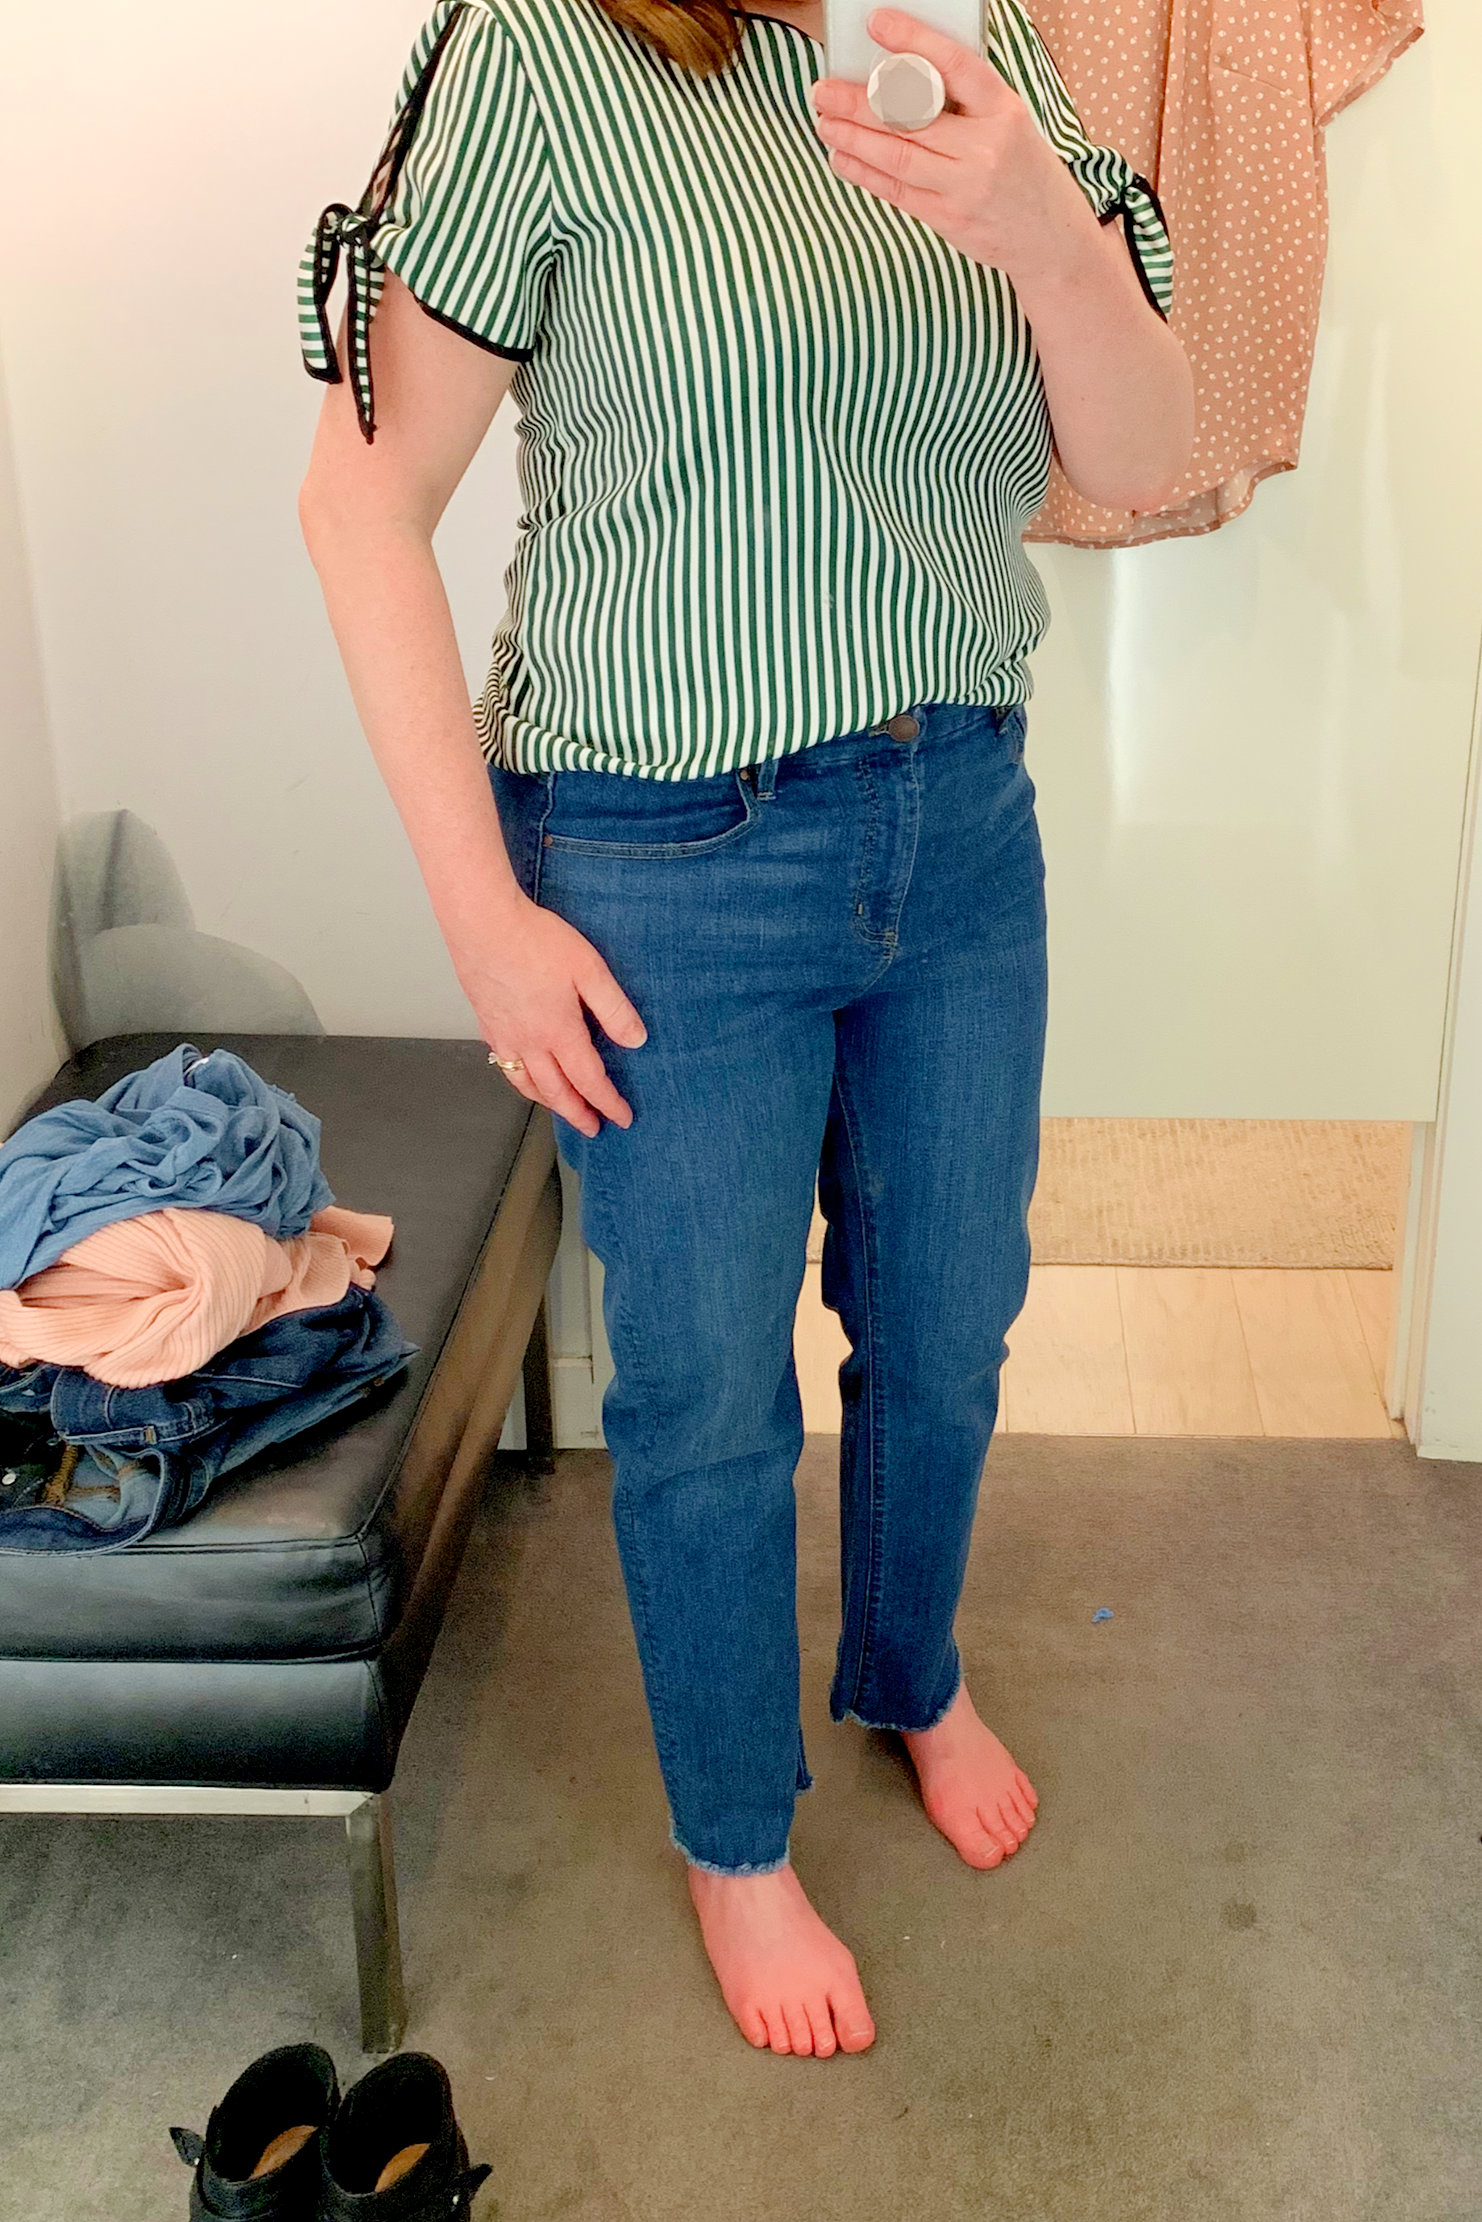 Clothes Try On + Great Sale